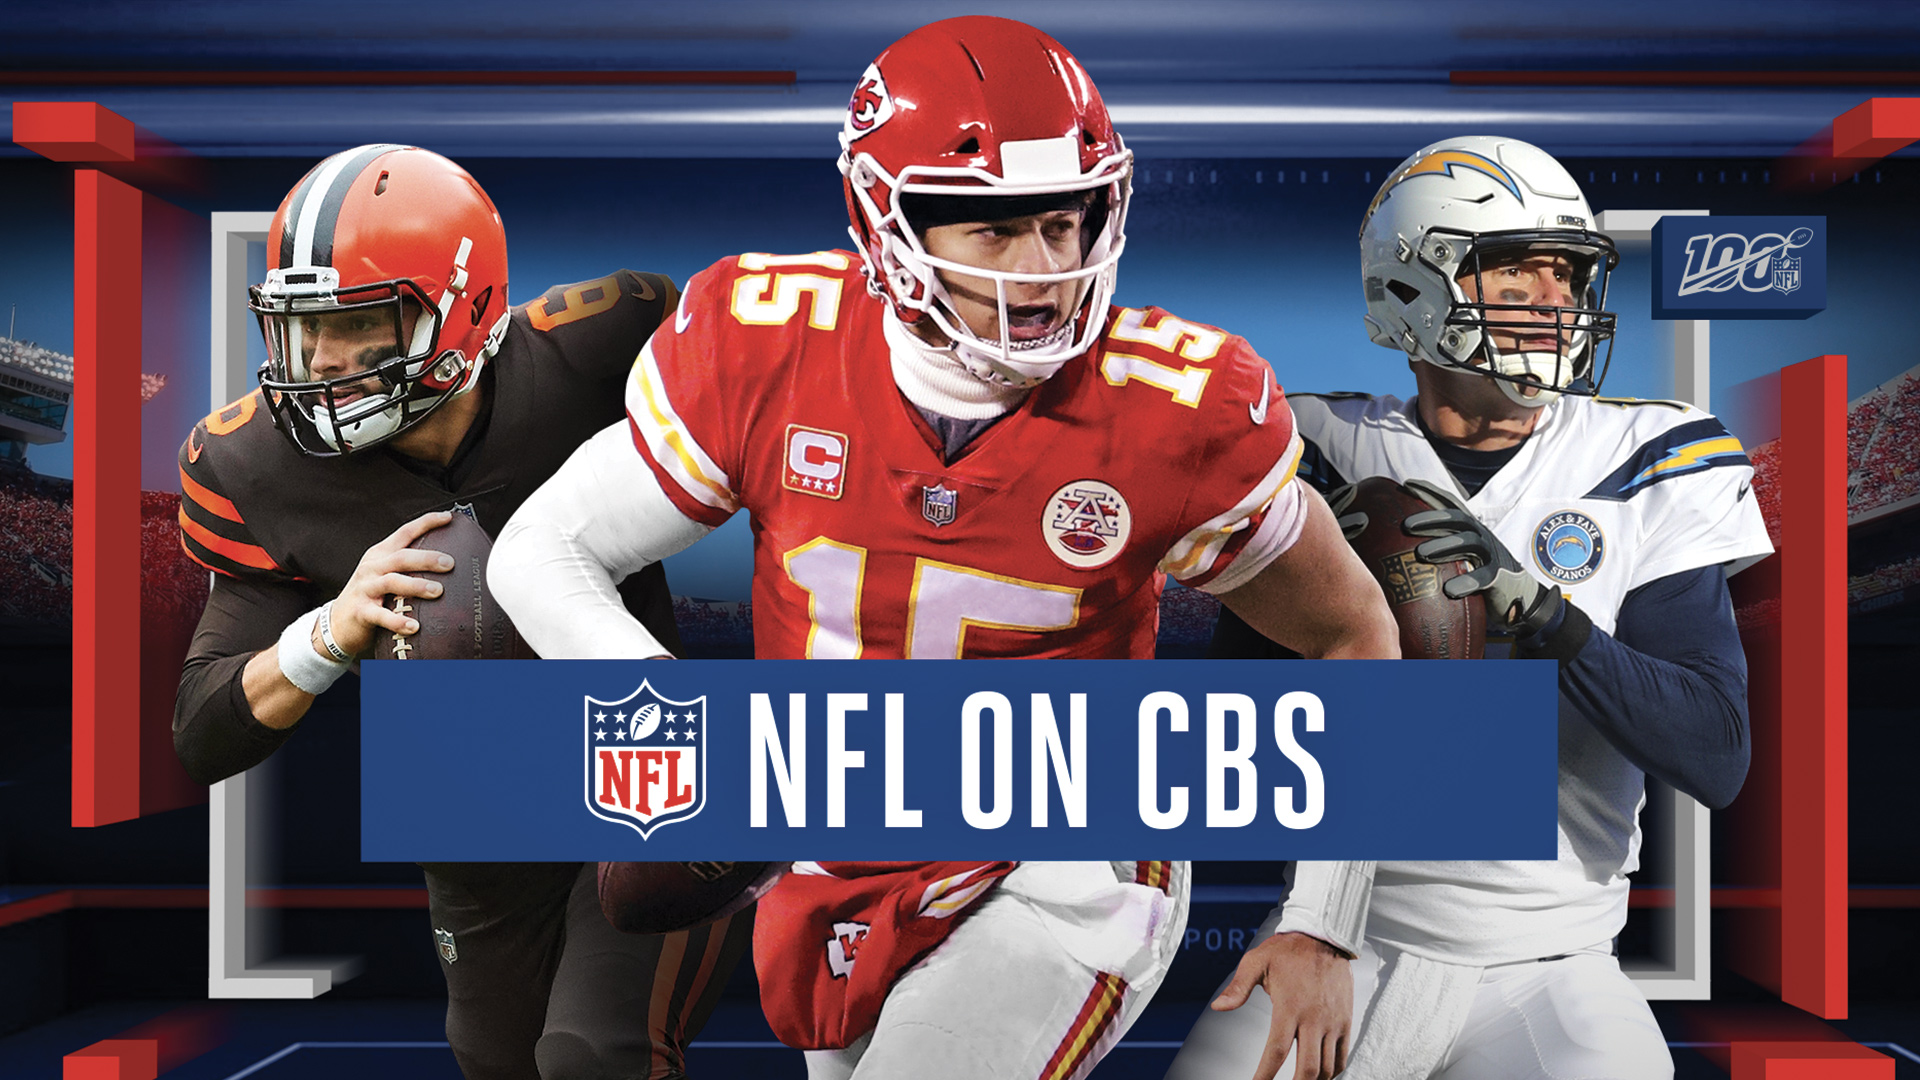 nfl cbs football games streaming promo schedule shows access